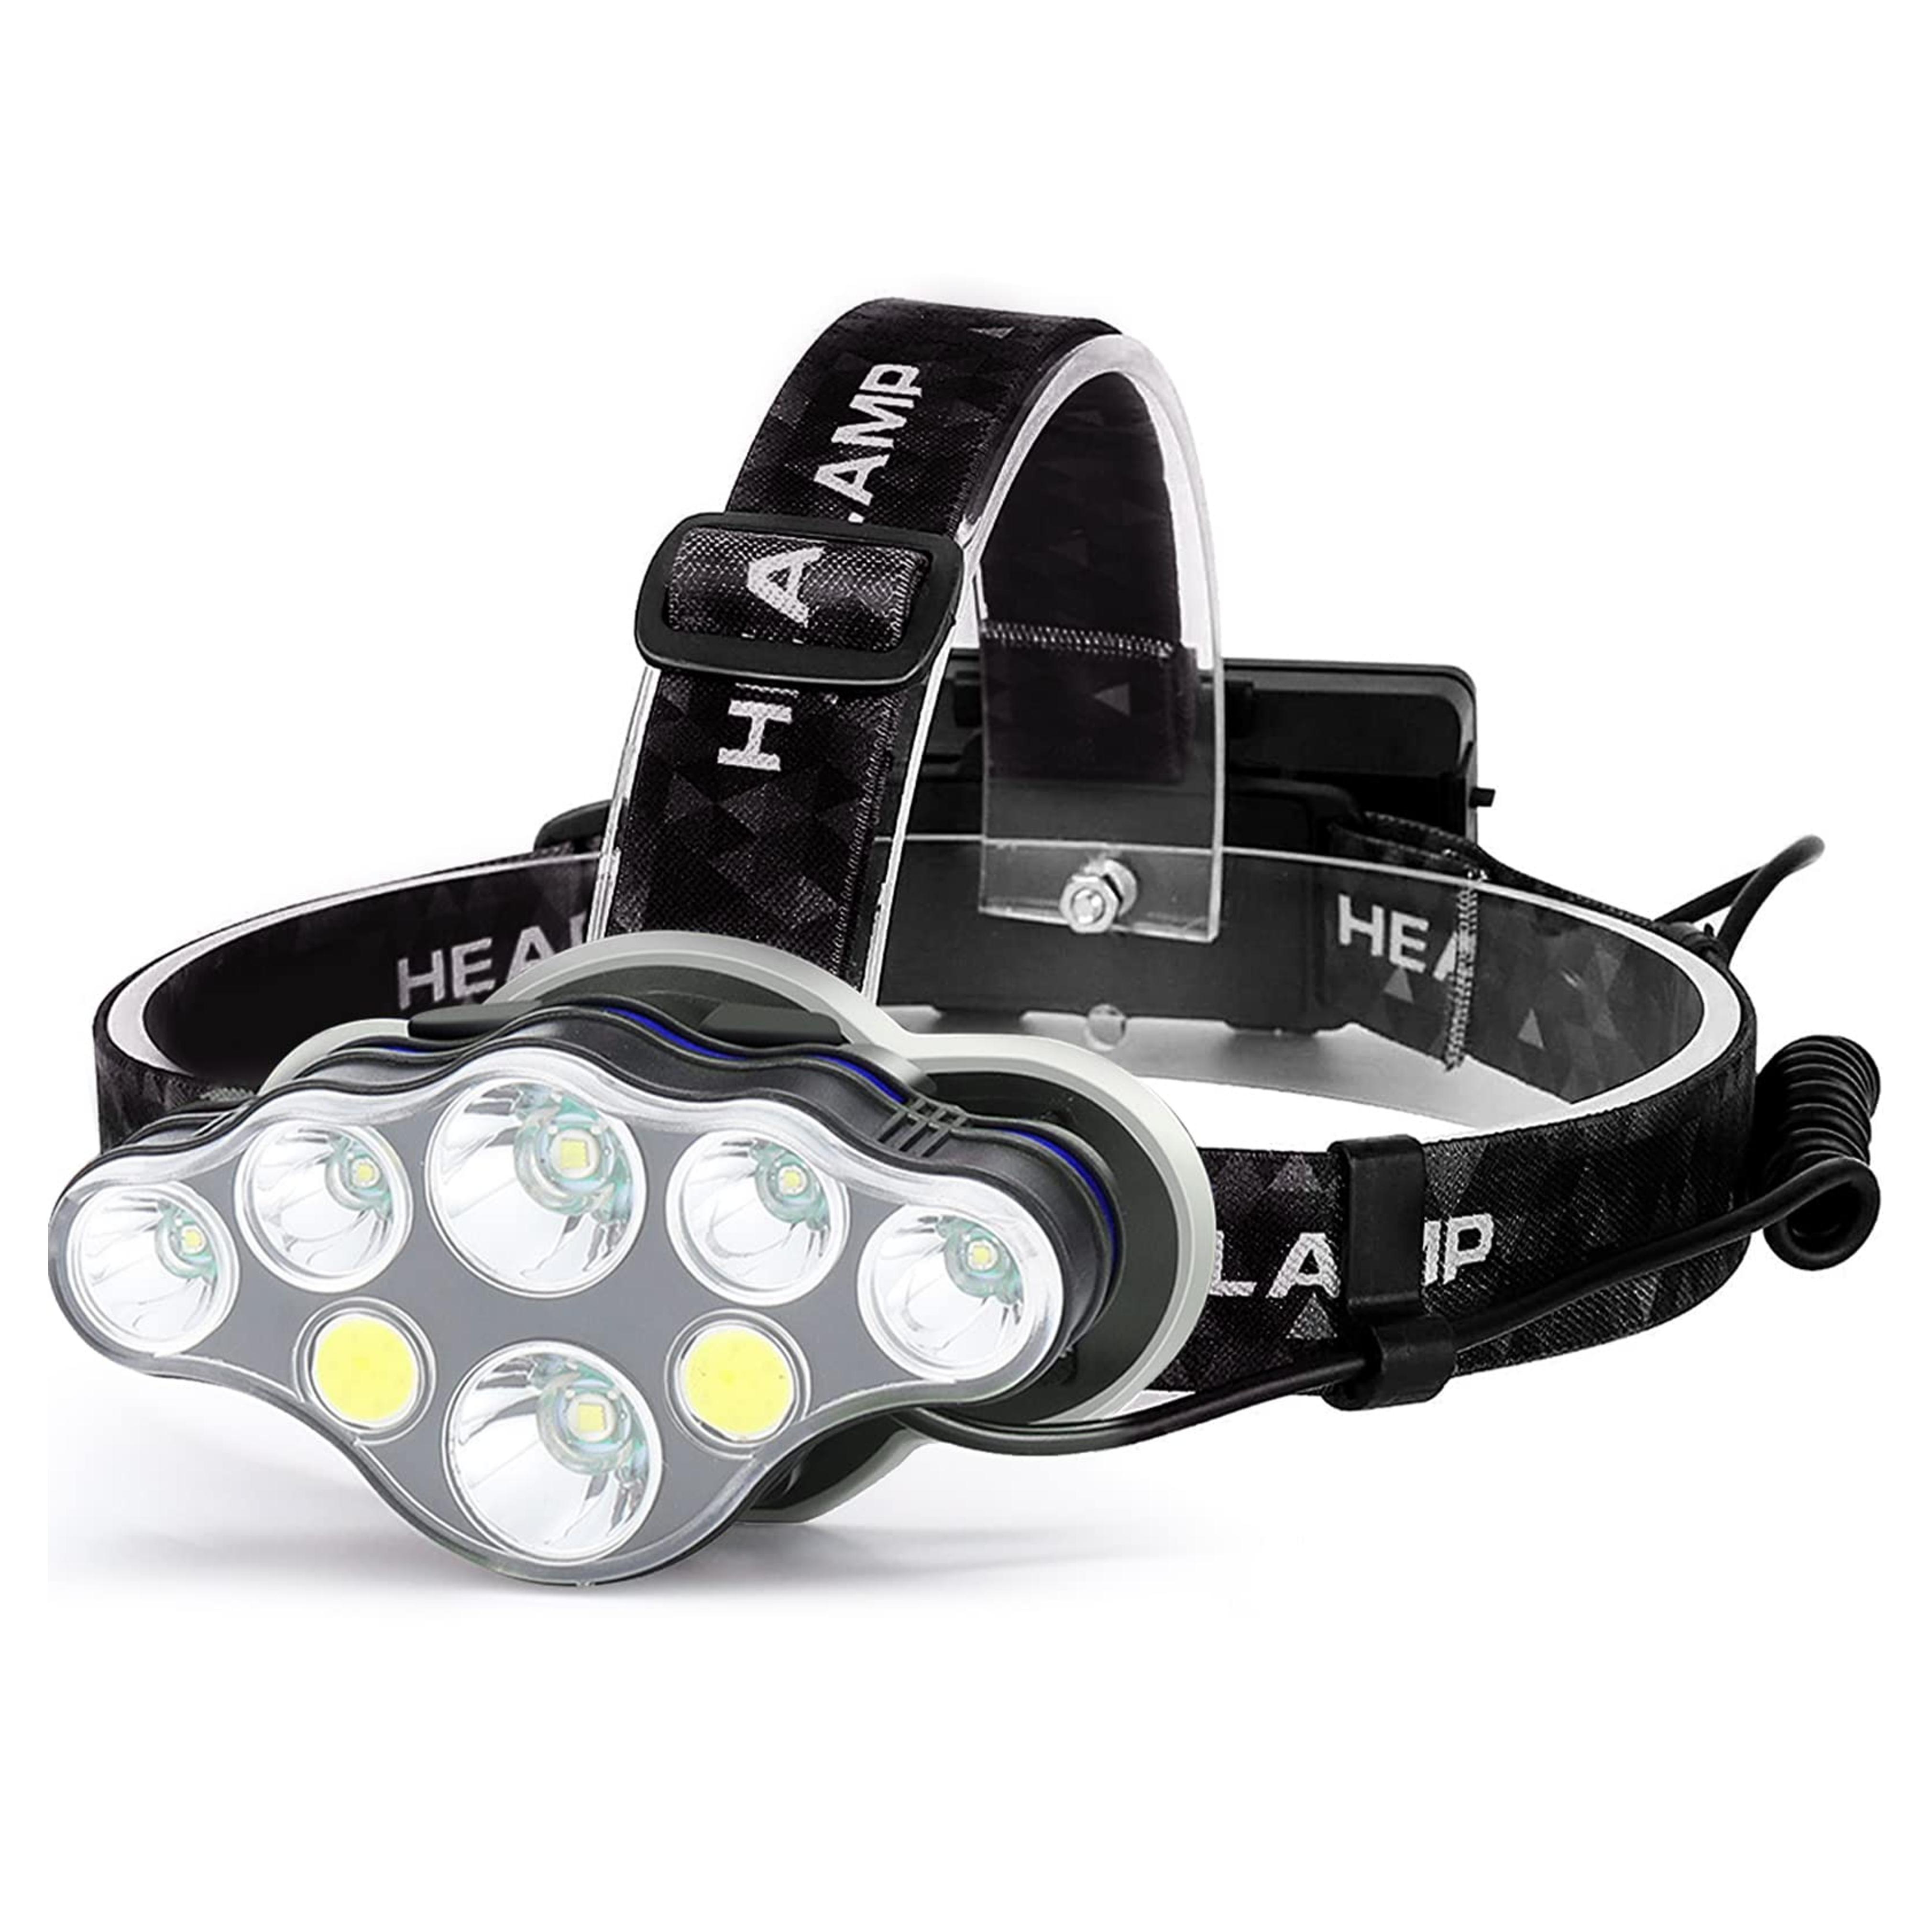 Victoper Rechargeable Headlamp, 8 LED 18000 High Lumen Bright Head Lamp with Red Light, Lightweight USB Head Light, 8 Mode Waterproof Head Flashlight for Outdoor Running Hunting Camping Gear, Black